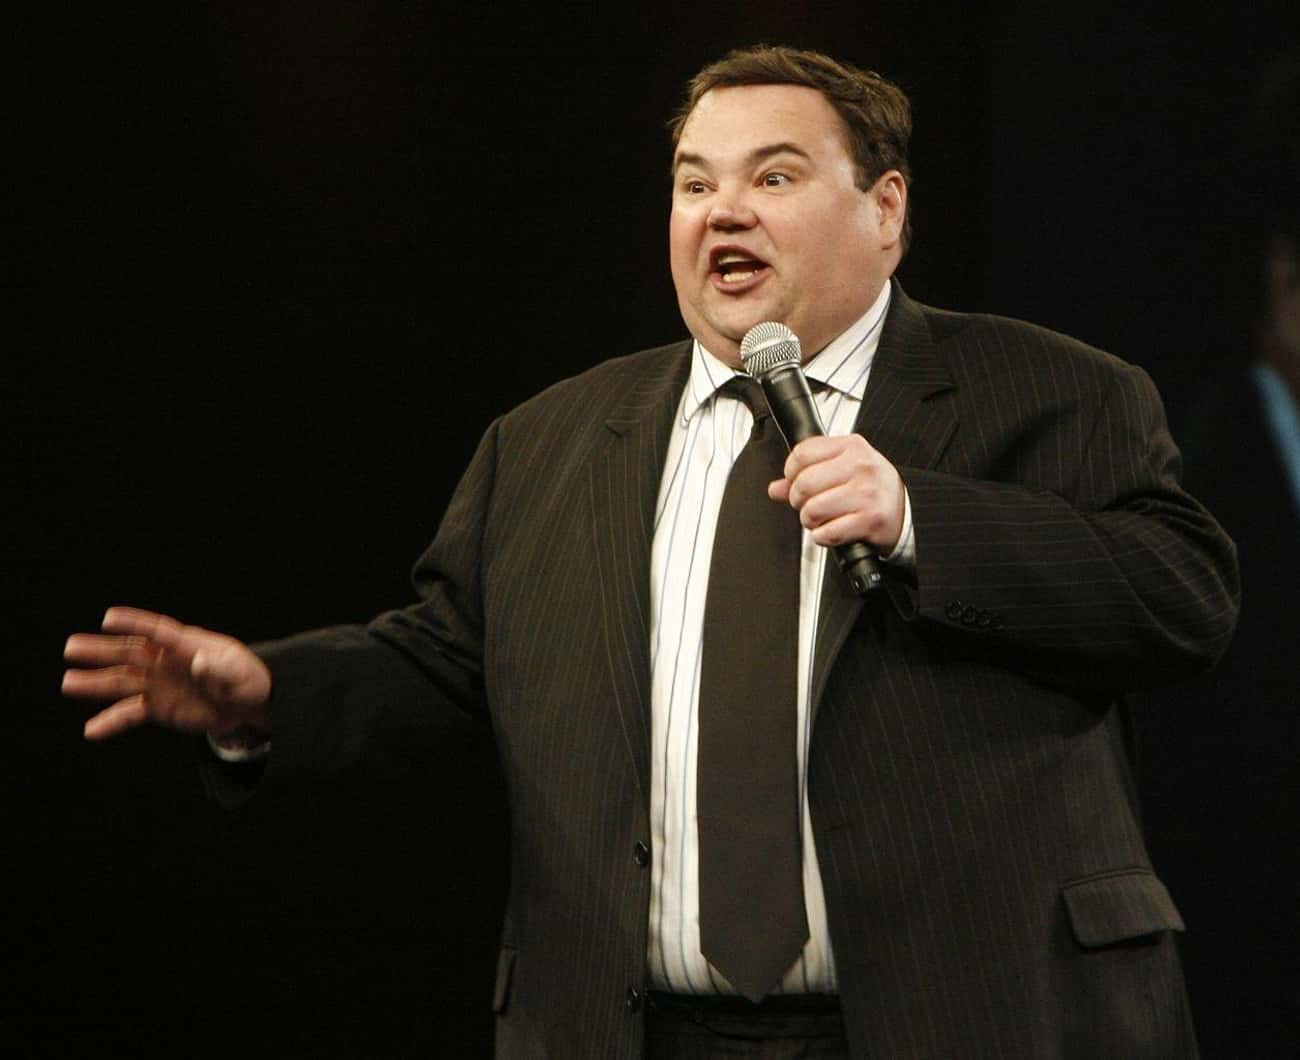 John Pinette Died Unexpectedly At The Sheraton In Pittsburgh